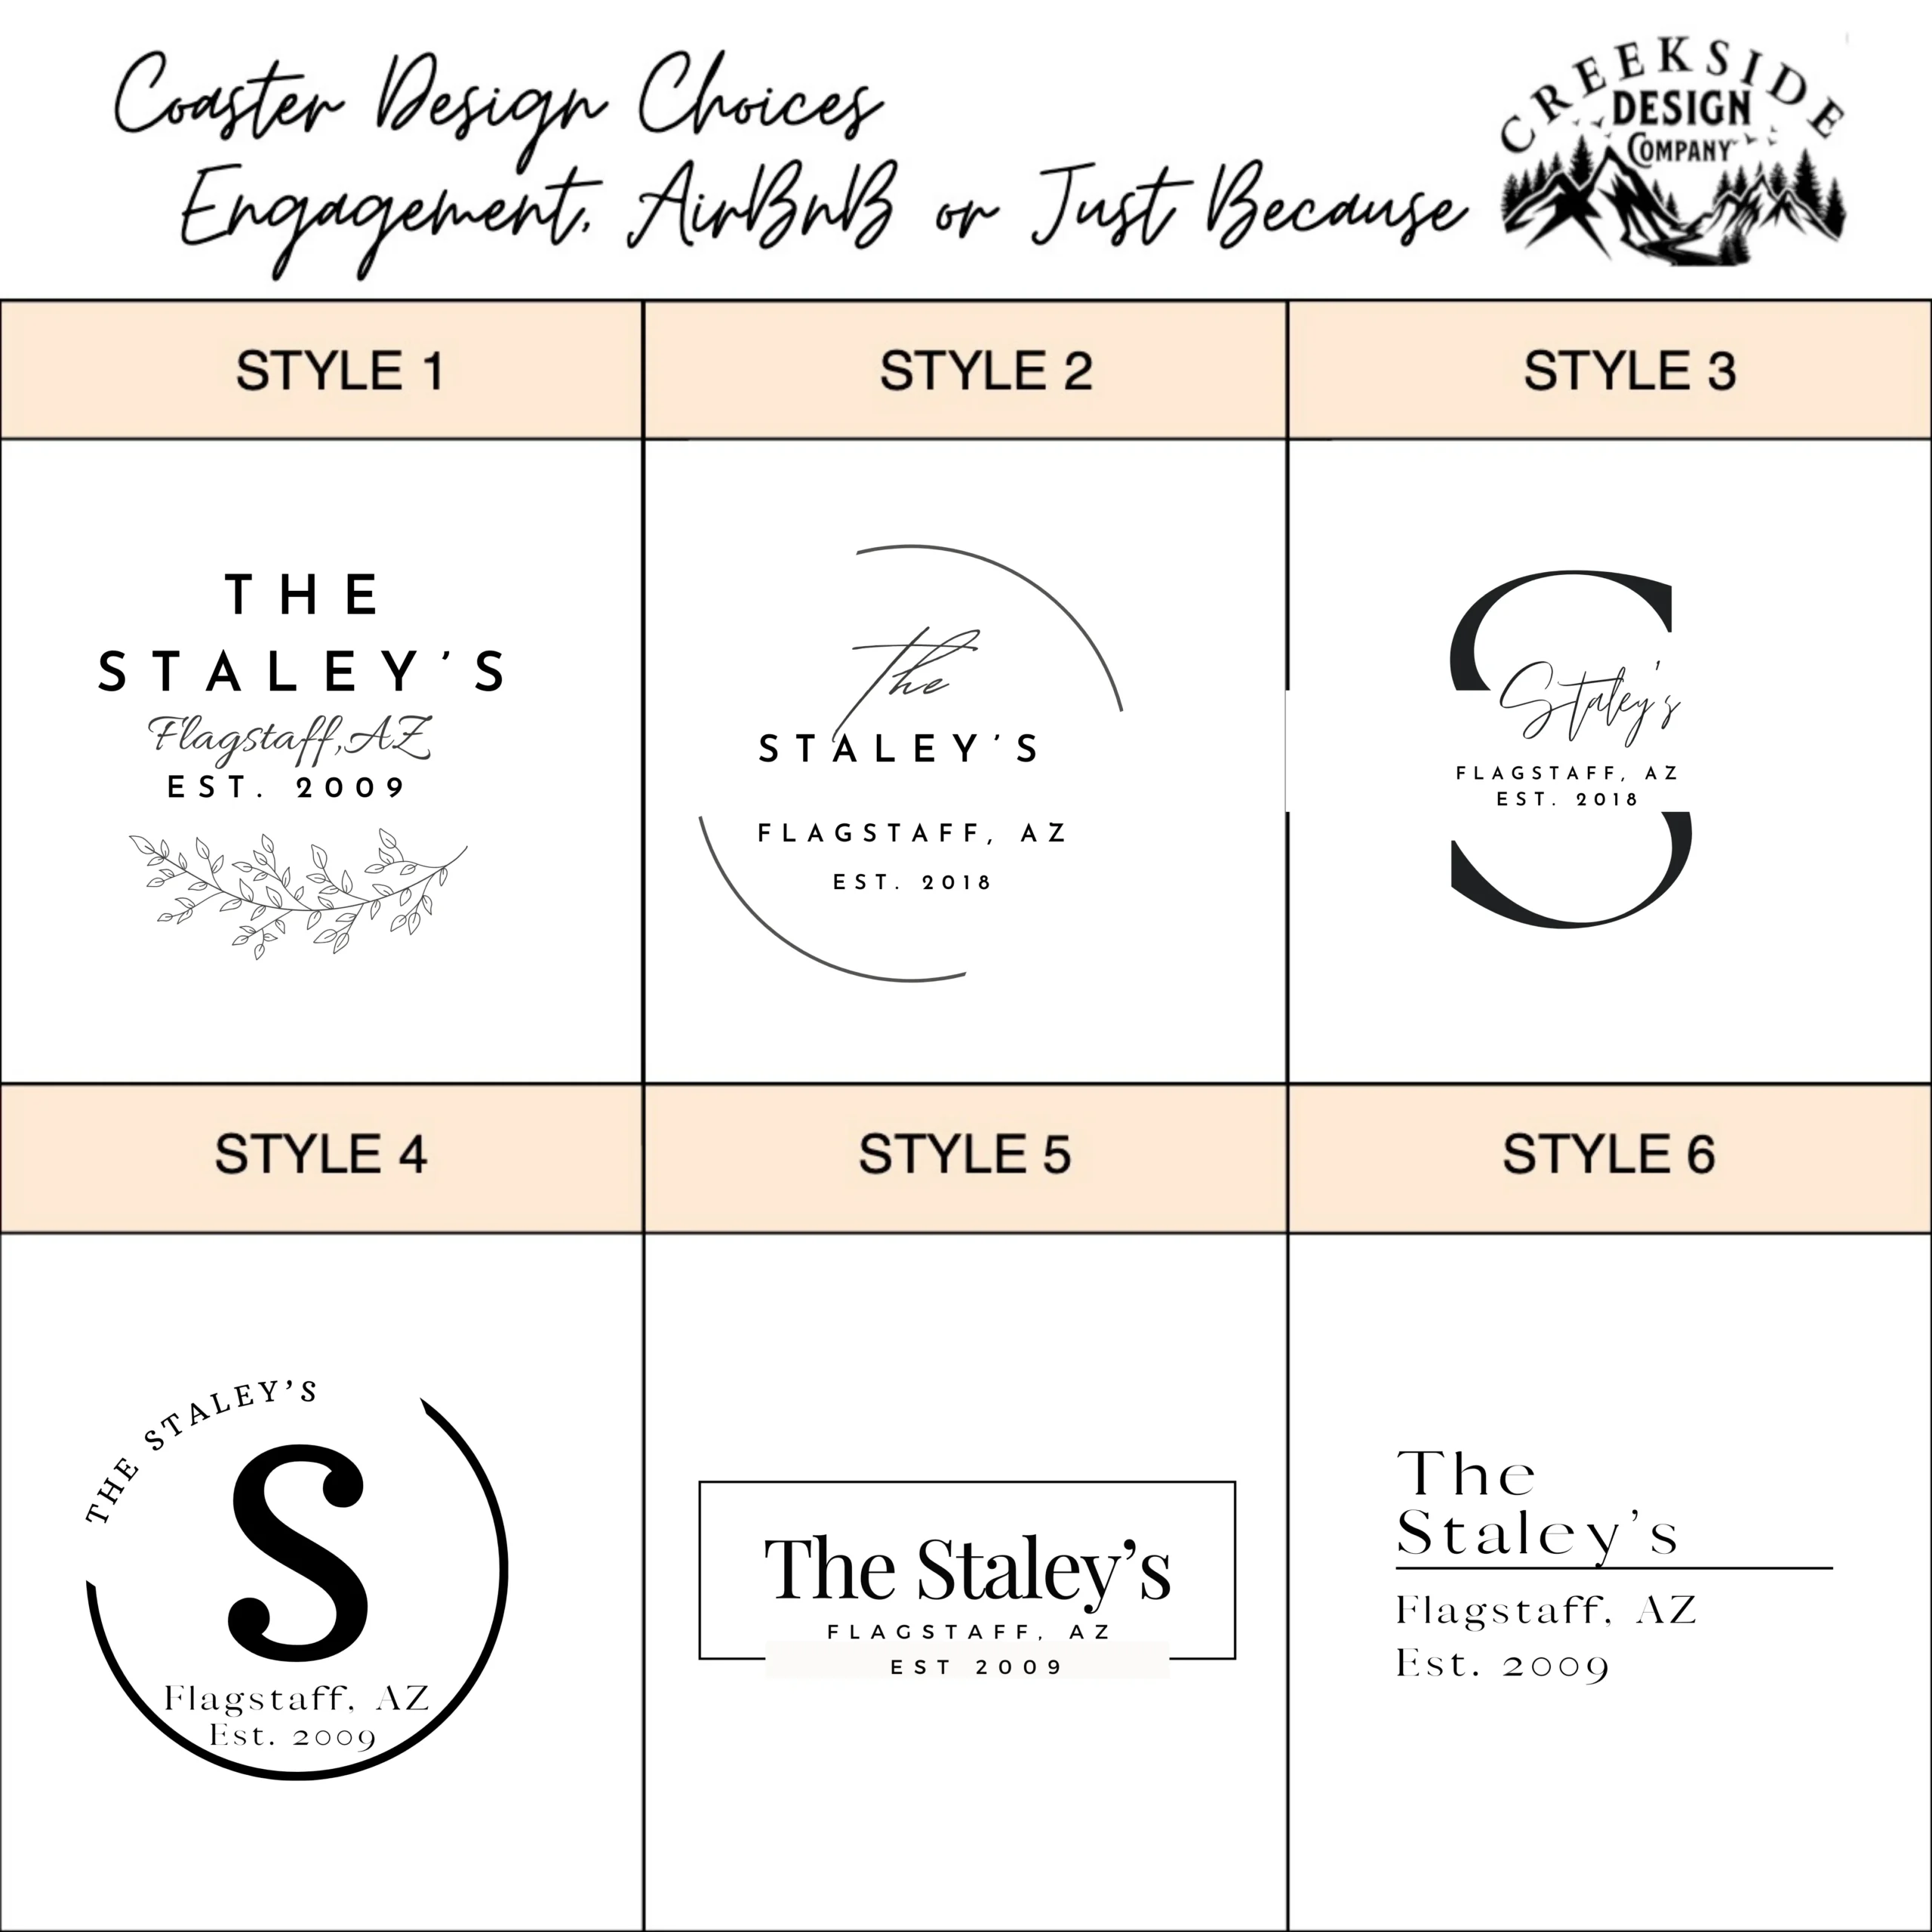 Coaster Design Choices by Creekside Design Company